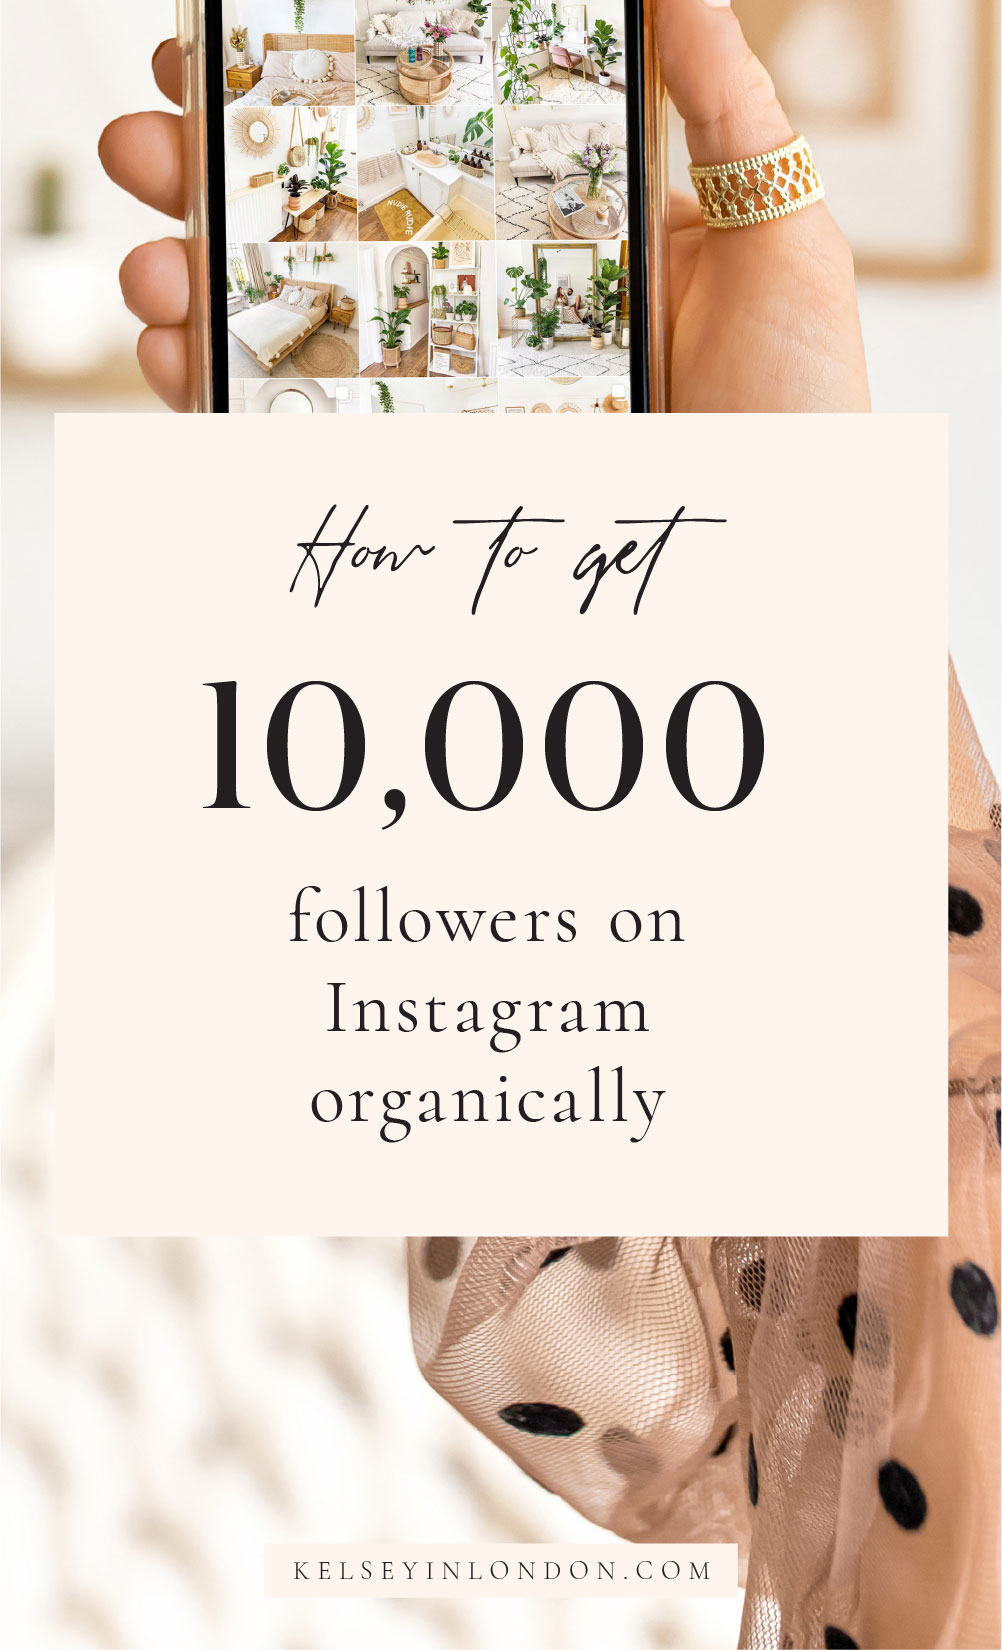 Kelseyinlondon homewithkelsey Kelsey Heinrichs Instagram hashtags strategy how to get 10000 followers on instagram growth social media tips 